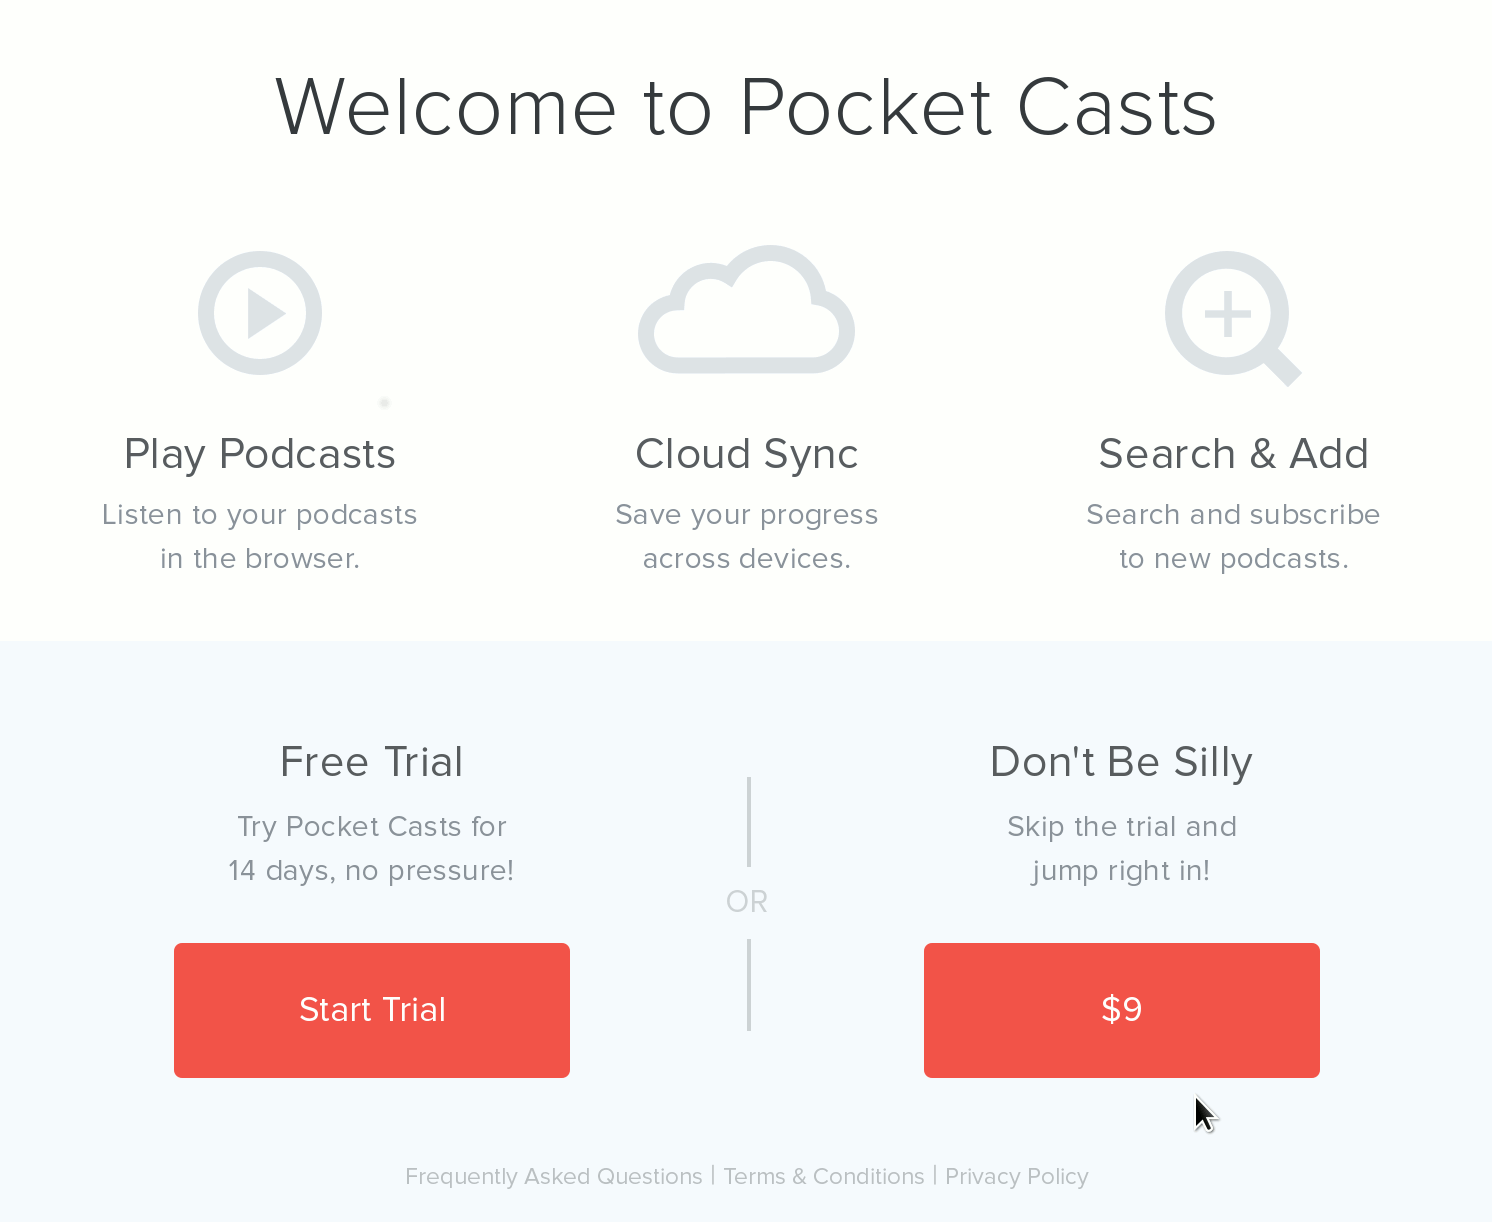 Welcome to Pocket Casts: Multiple choices dialog between free trial and immediately pay the one-time service fee